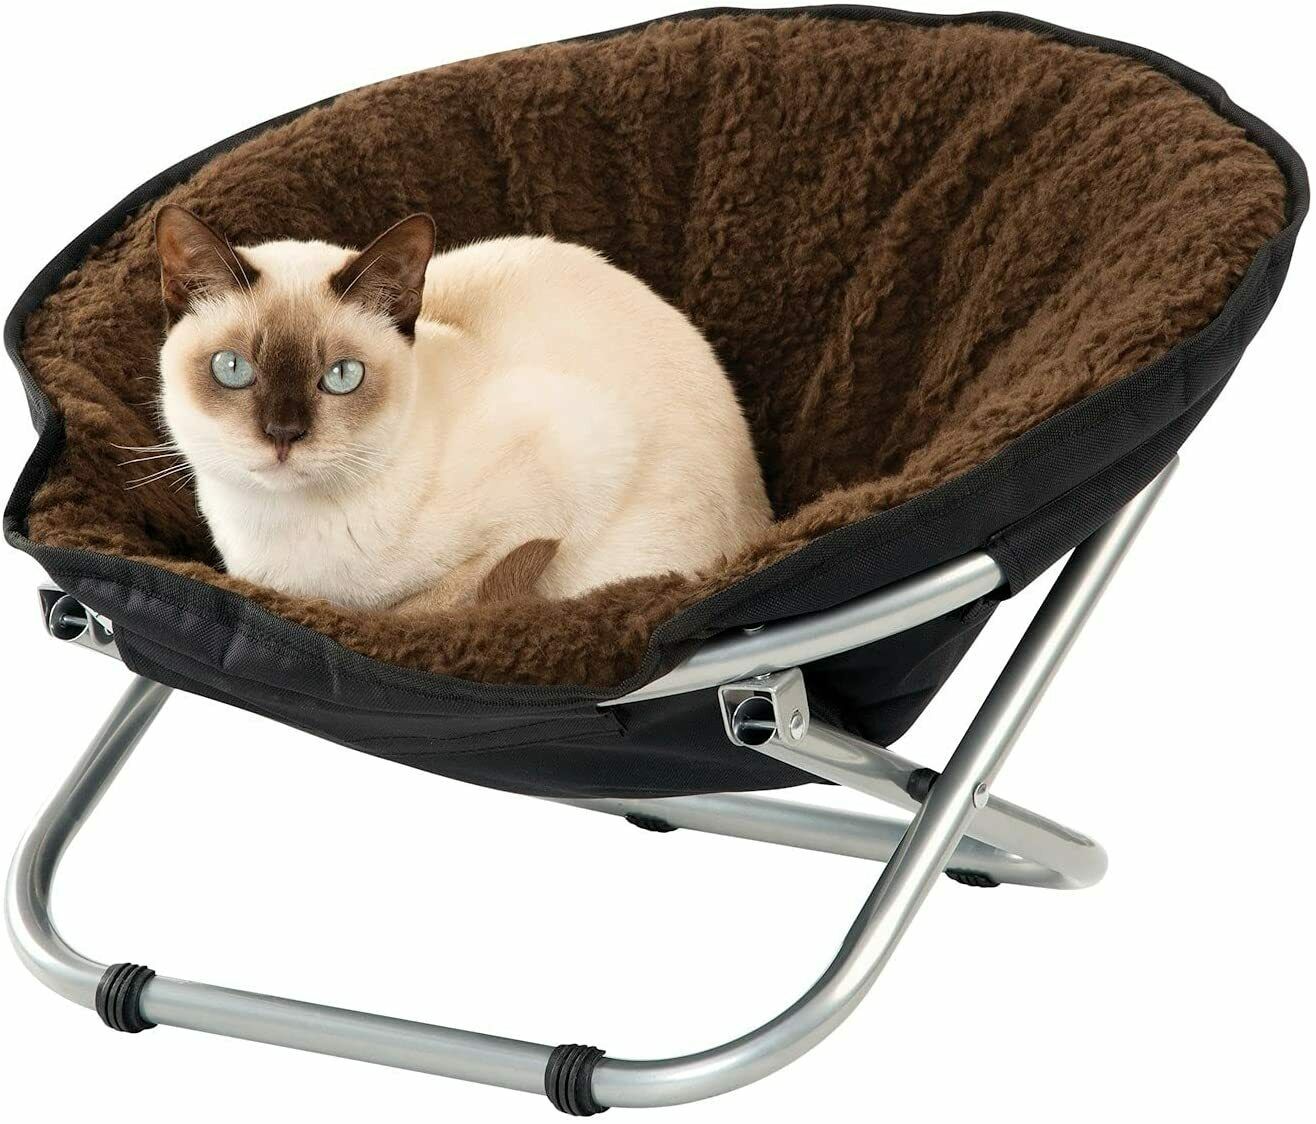 Pet Cot Chair - Portable Round Fold Out Elevated Cat Bed - Brown Fleece Top Cushion - Papasan Chair for Small Dogs